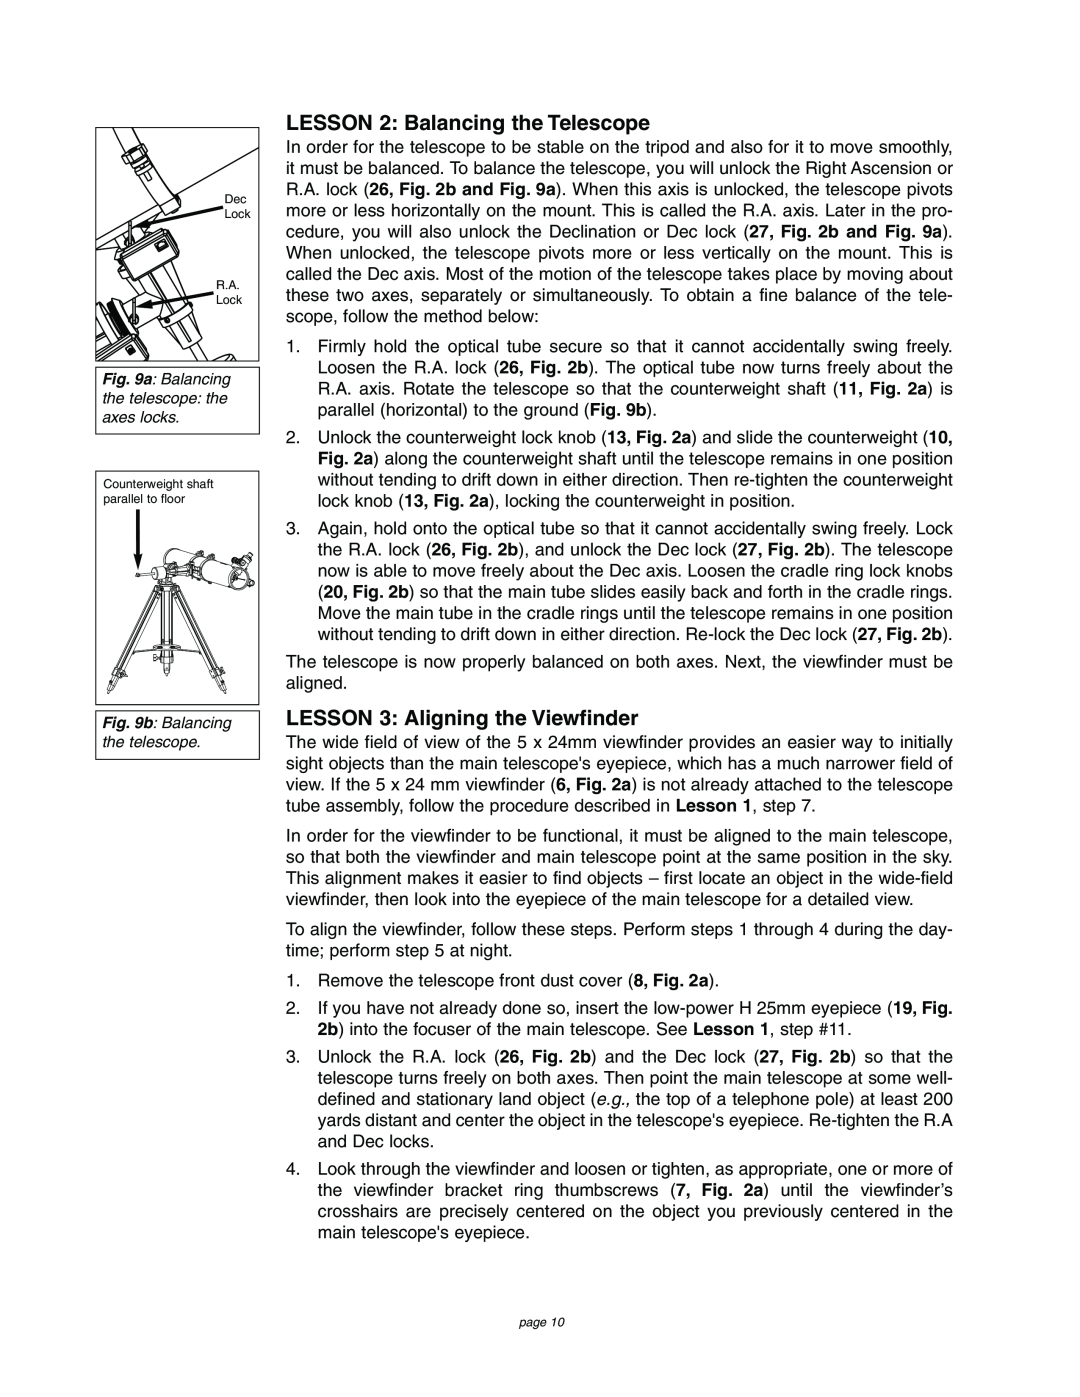 Meade 4504 instruction manual LESSON 2 Balancing the Telescope, LESSON 3 Aligning the Viewfinder 